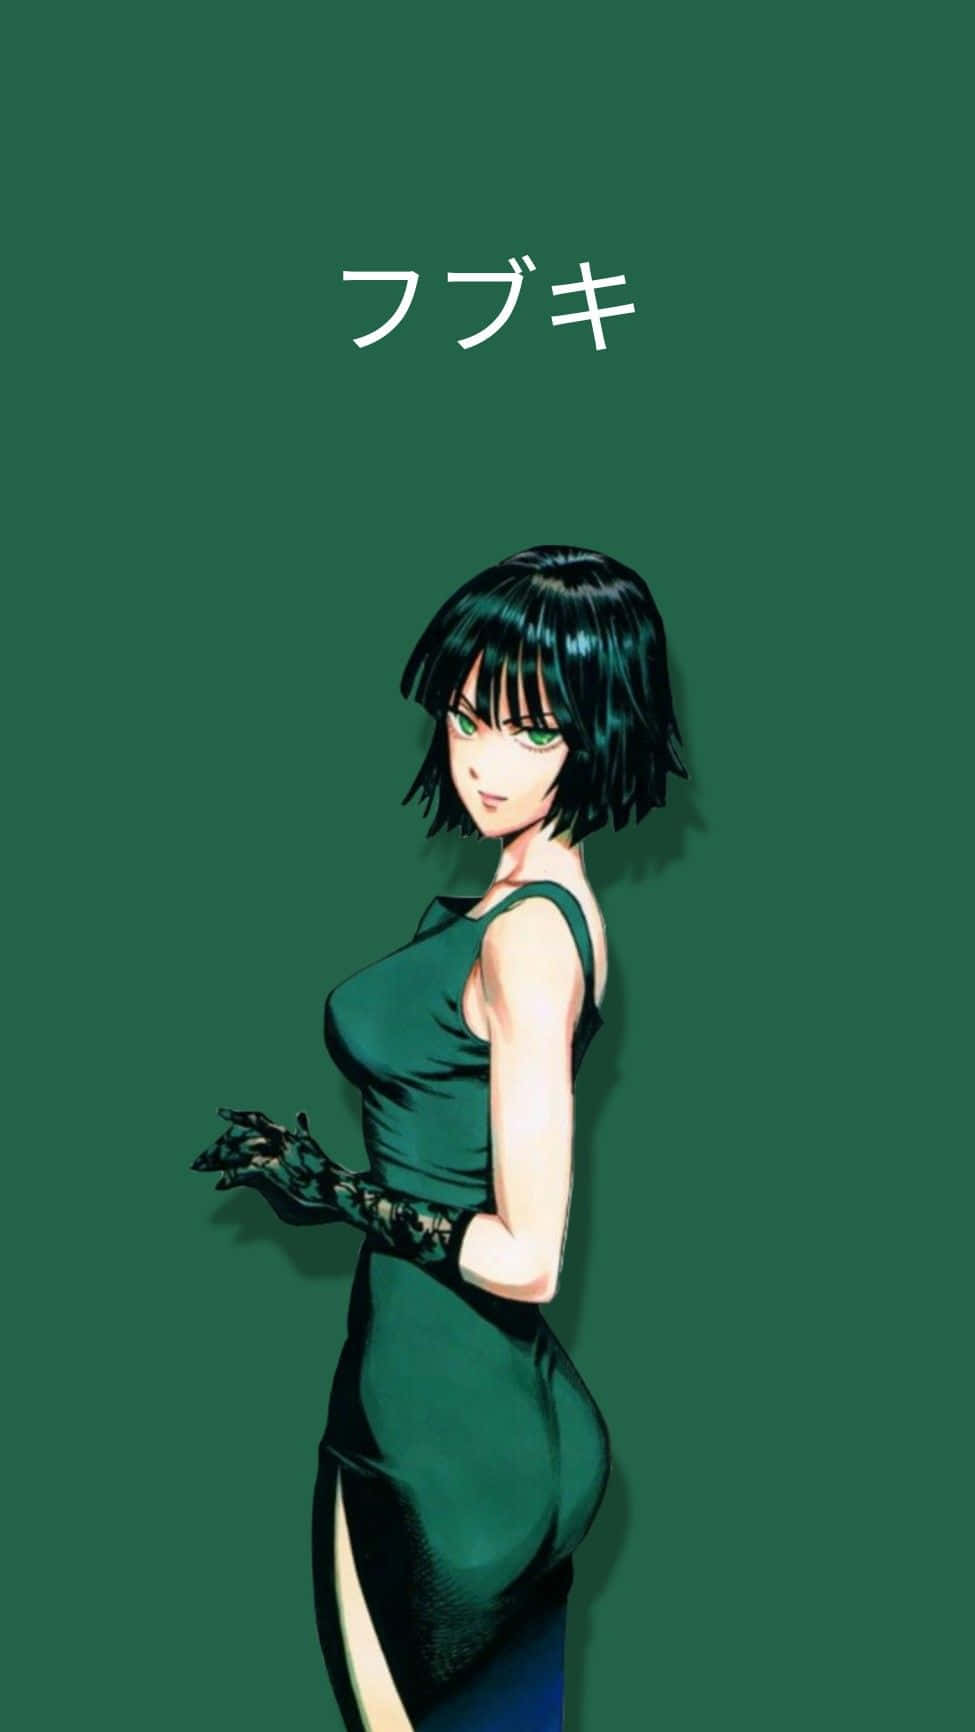 Download Fubuki striking a powerful pose against a fiery background  Wallpaper  Wallpaperscom